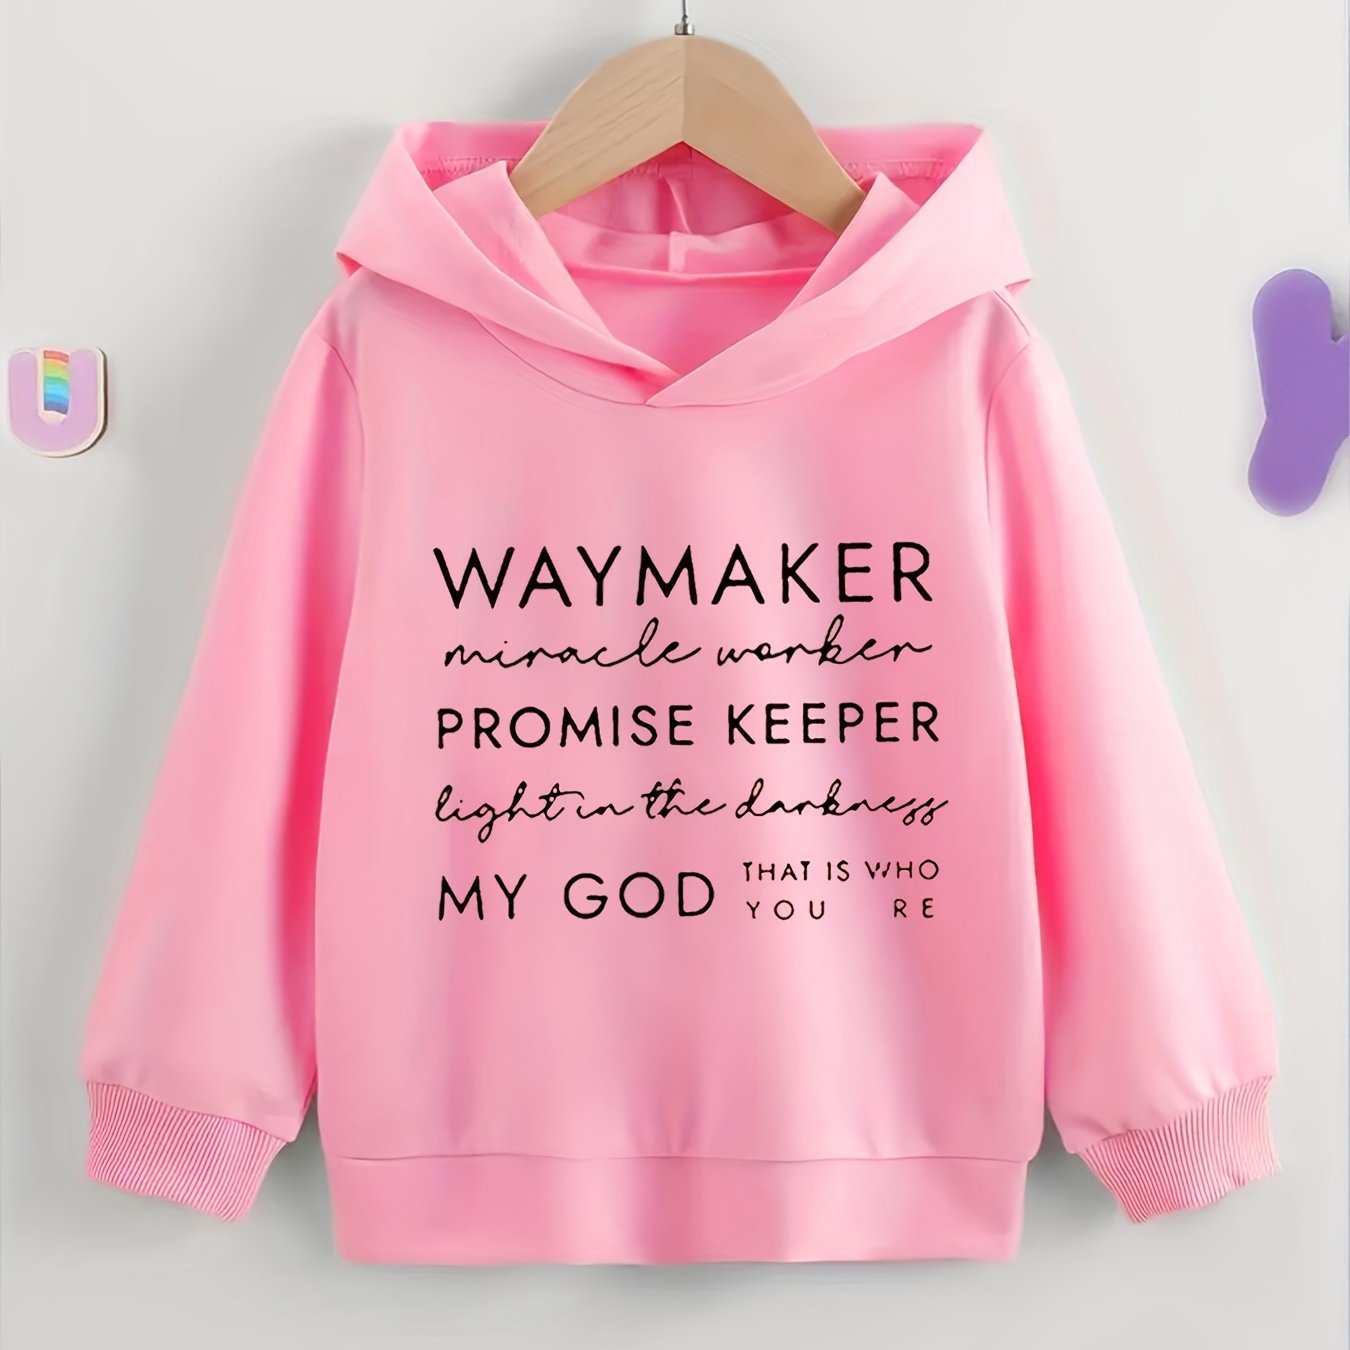 Waymaker Promise Keeper My God Youth Christian Pullover Hooded Sweatshirt claimedbygoddesigns